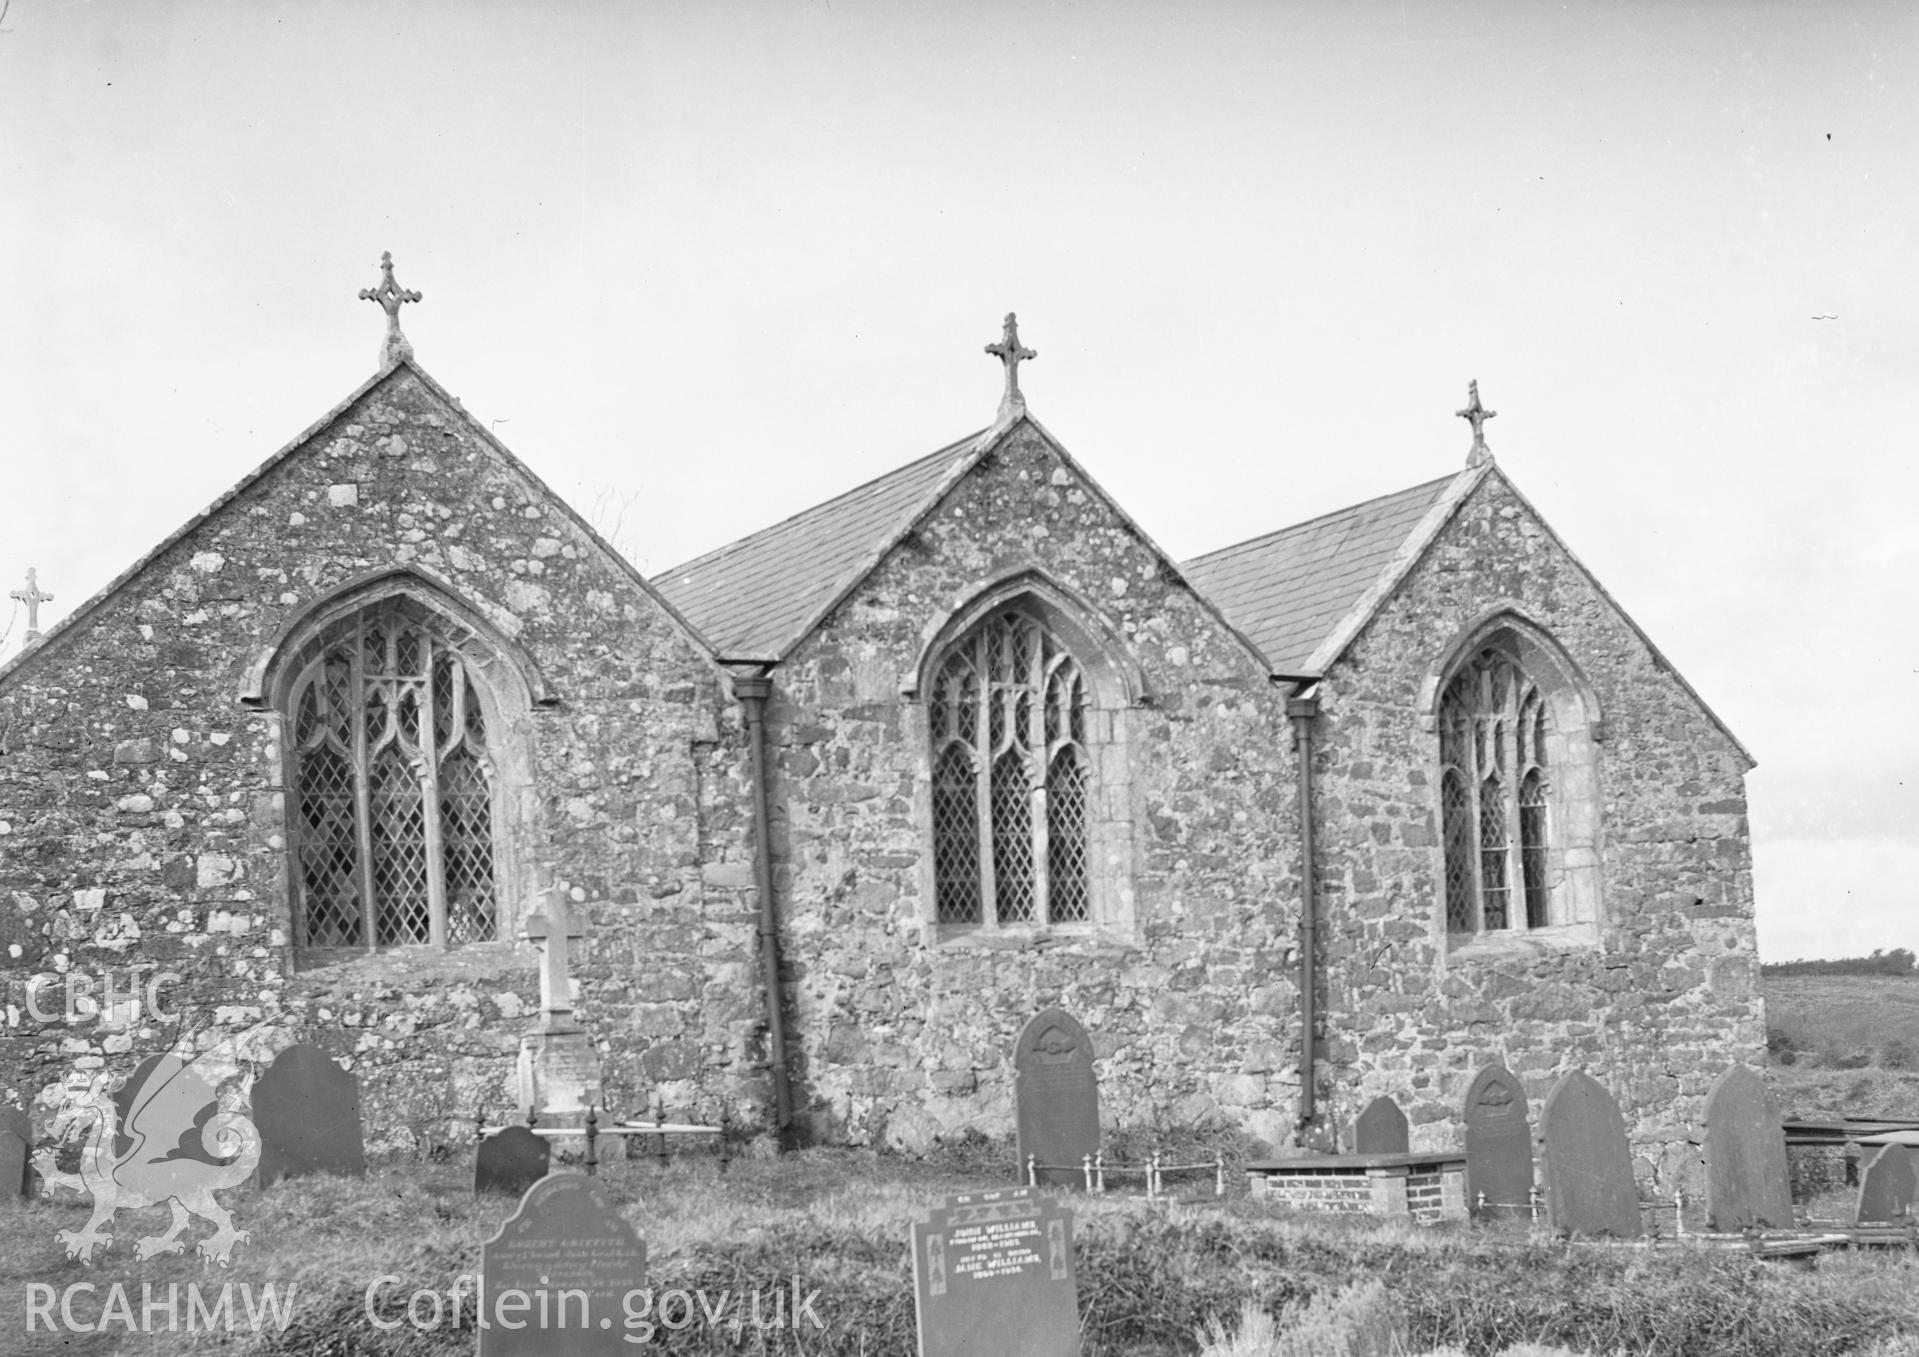 Black and white nitrate negative showing exterior view of Llangwnadl Church.